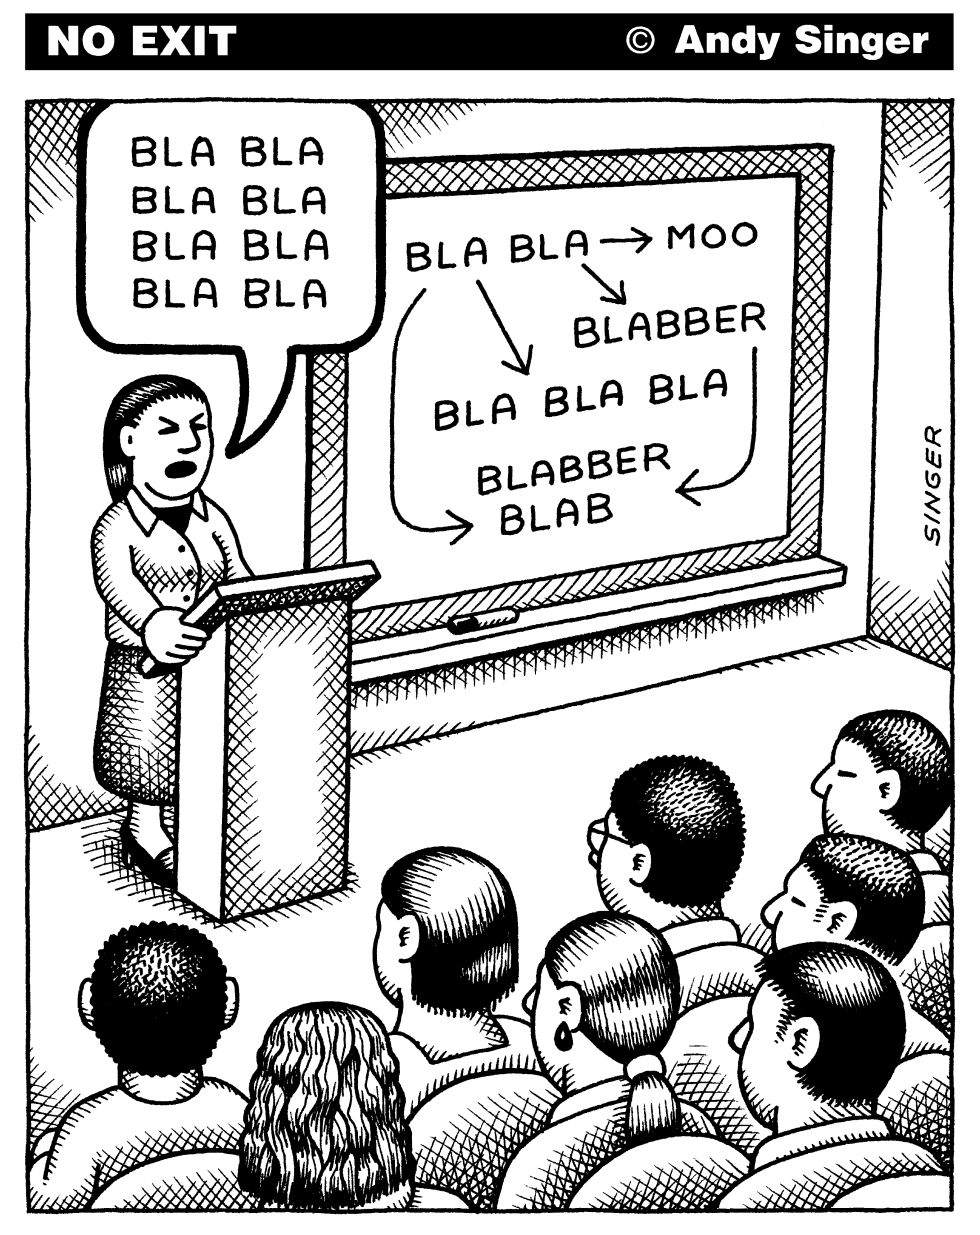 UNIVERSITY LECTURES by Andy Singer